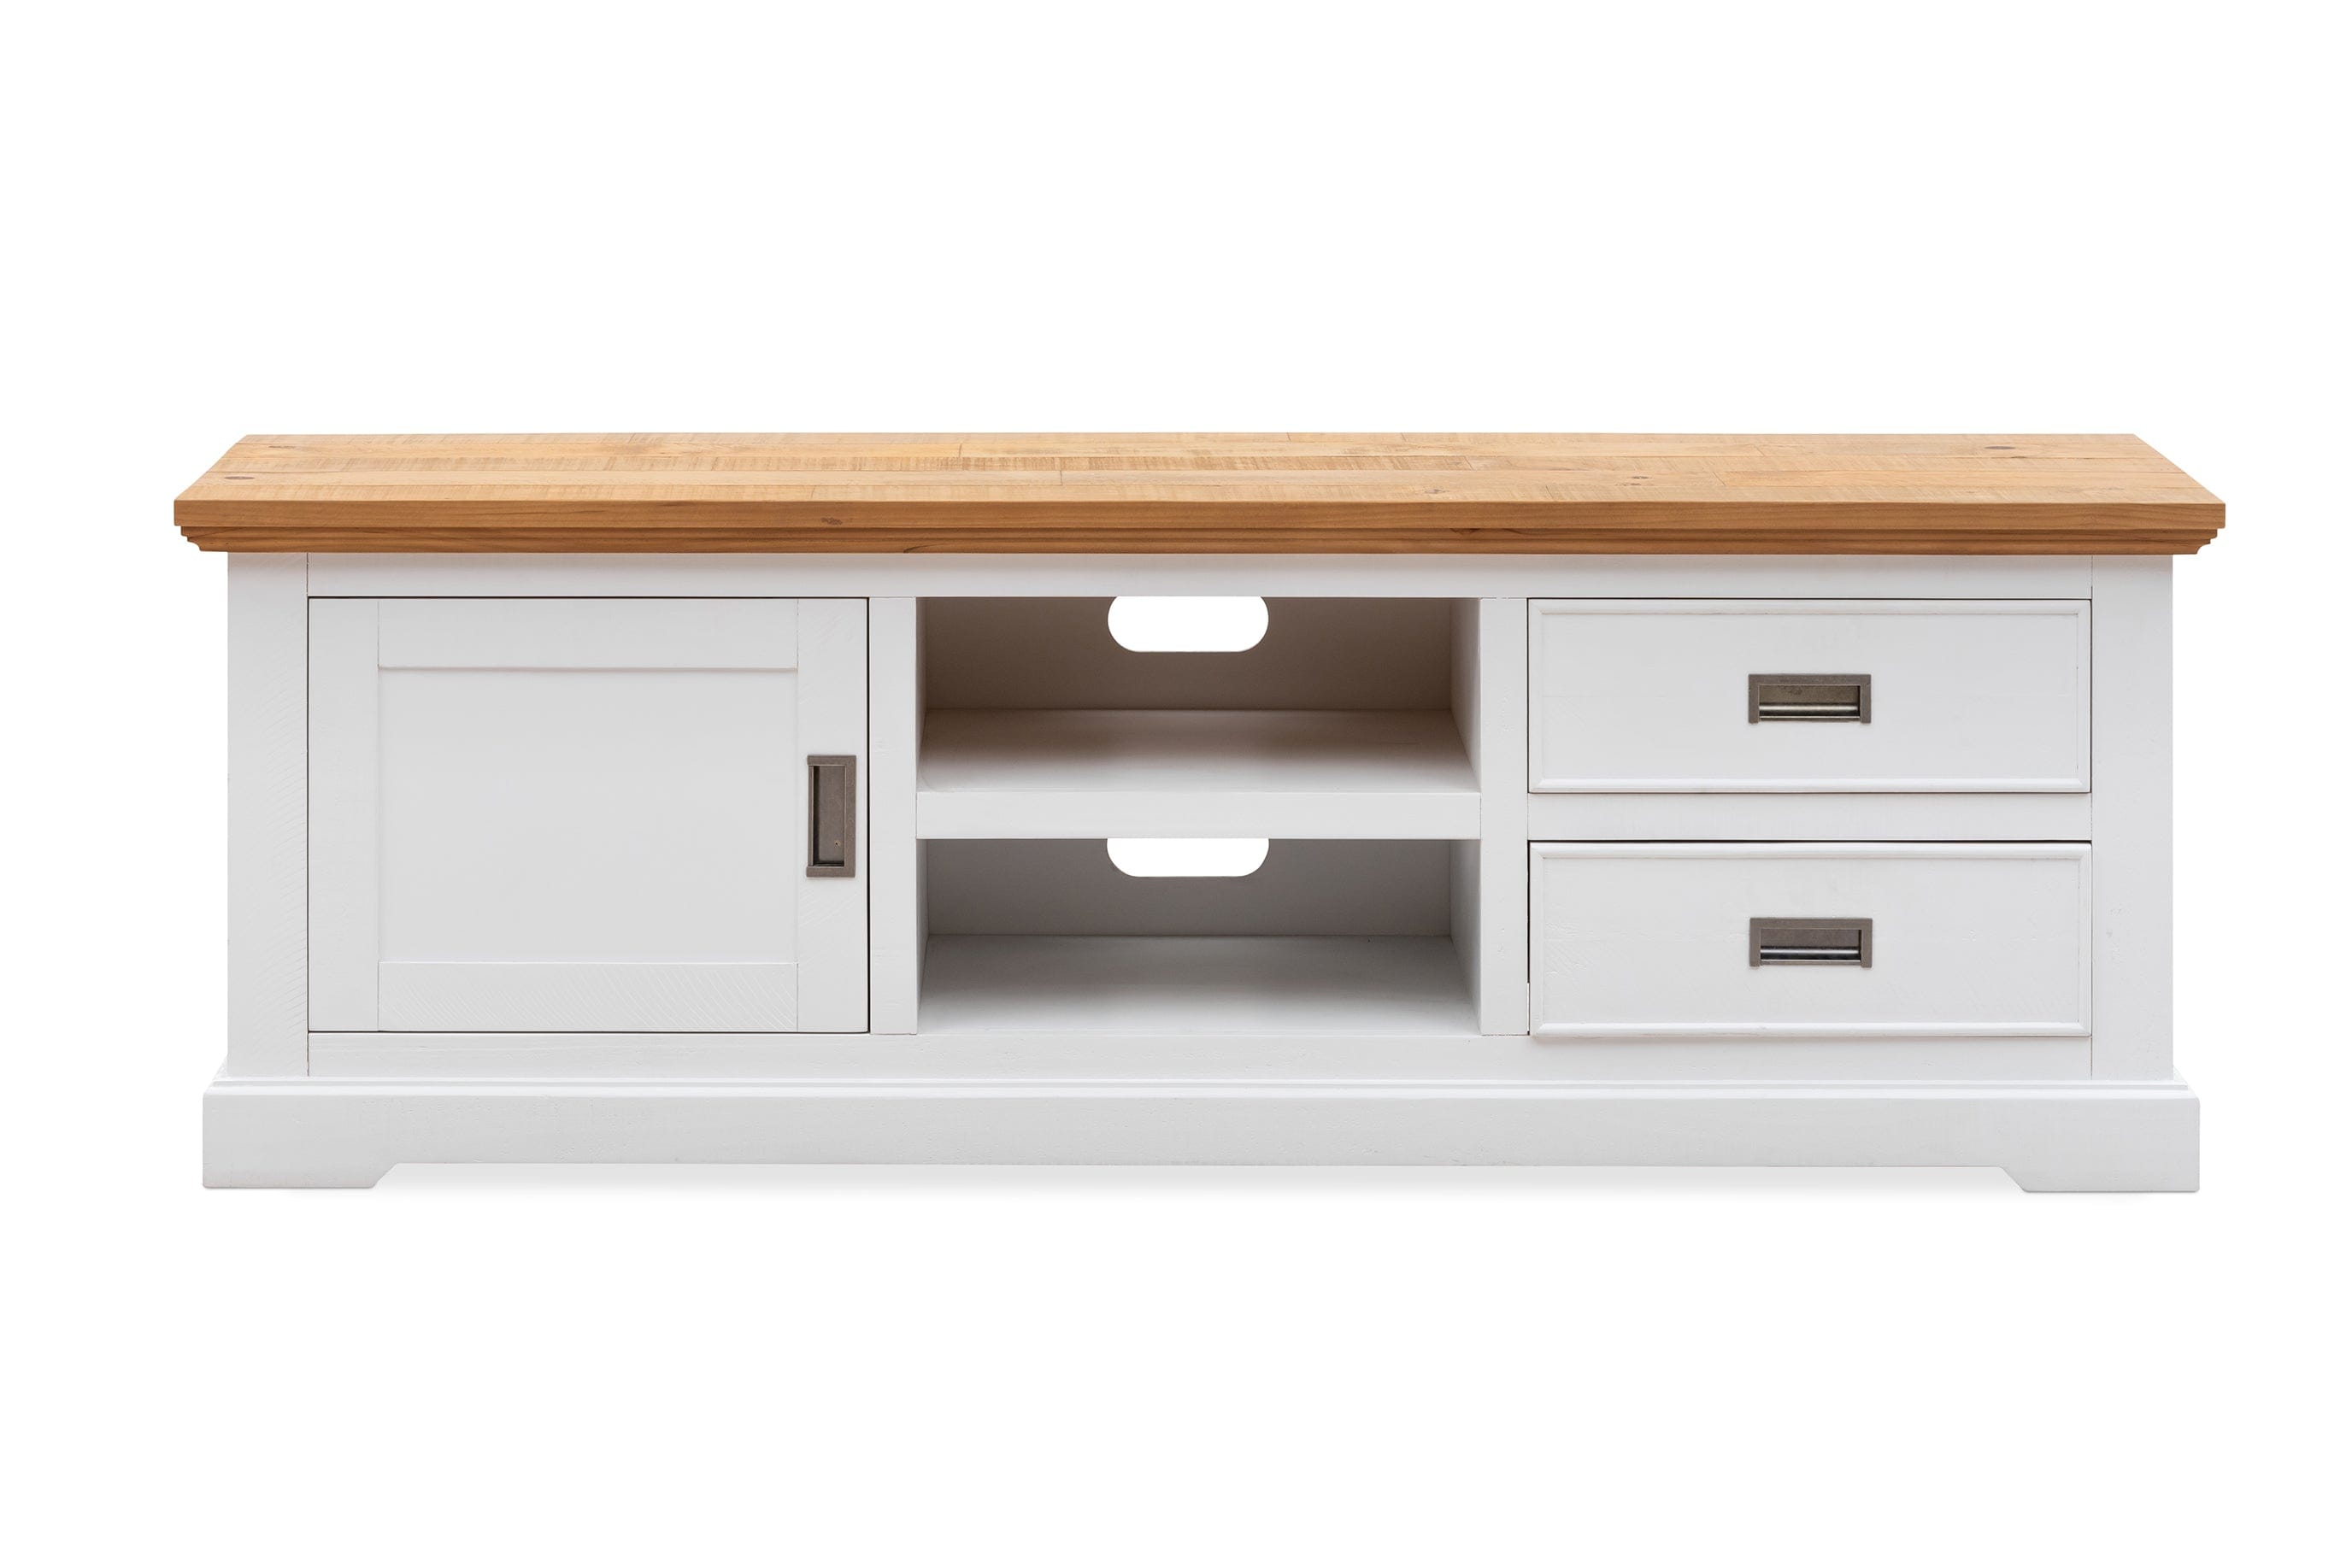 Westhampton TV Unit with Ball Bearing Runners Drawers